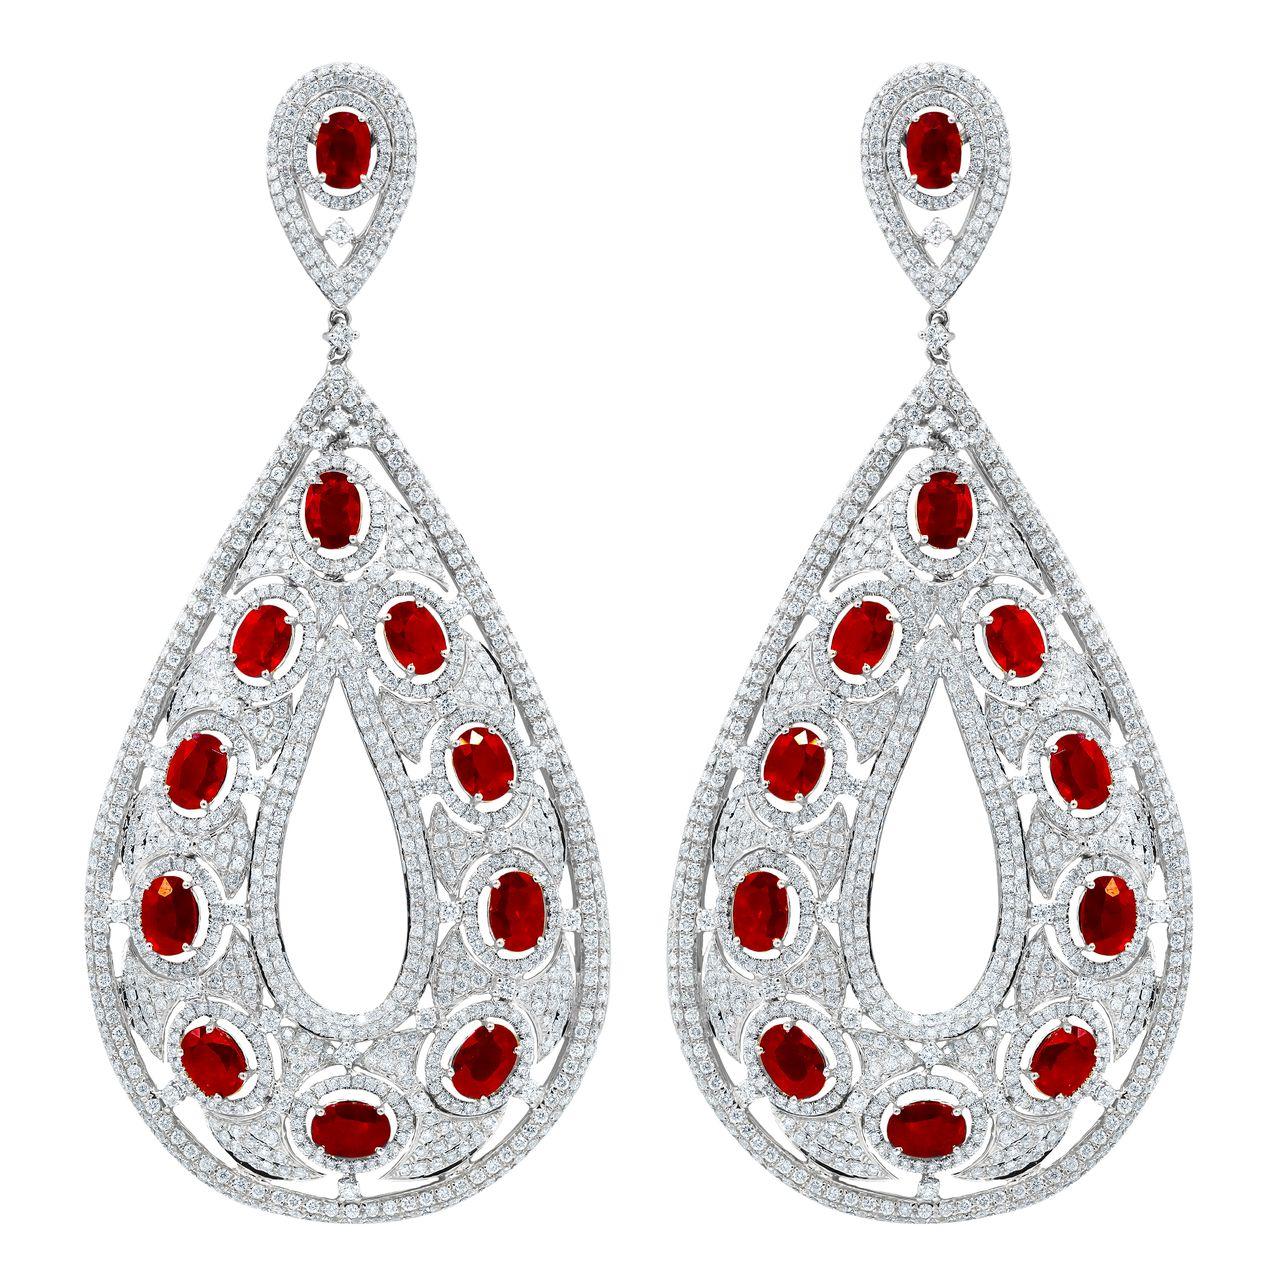 18K White gold Pear shape large size, over-sized ruby and diamond earrings, features  22.91 Carats Of rubies and 15.03 carats of white diamonds. 
4.5